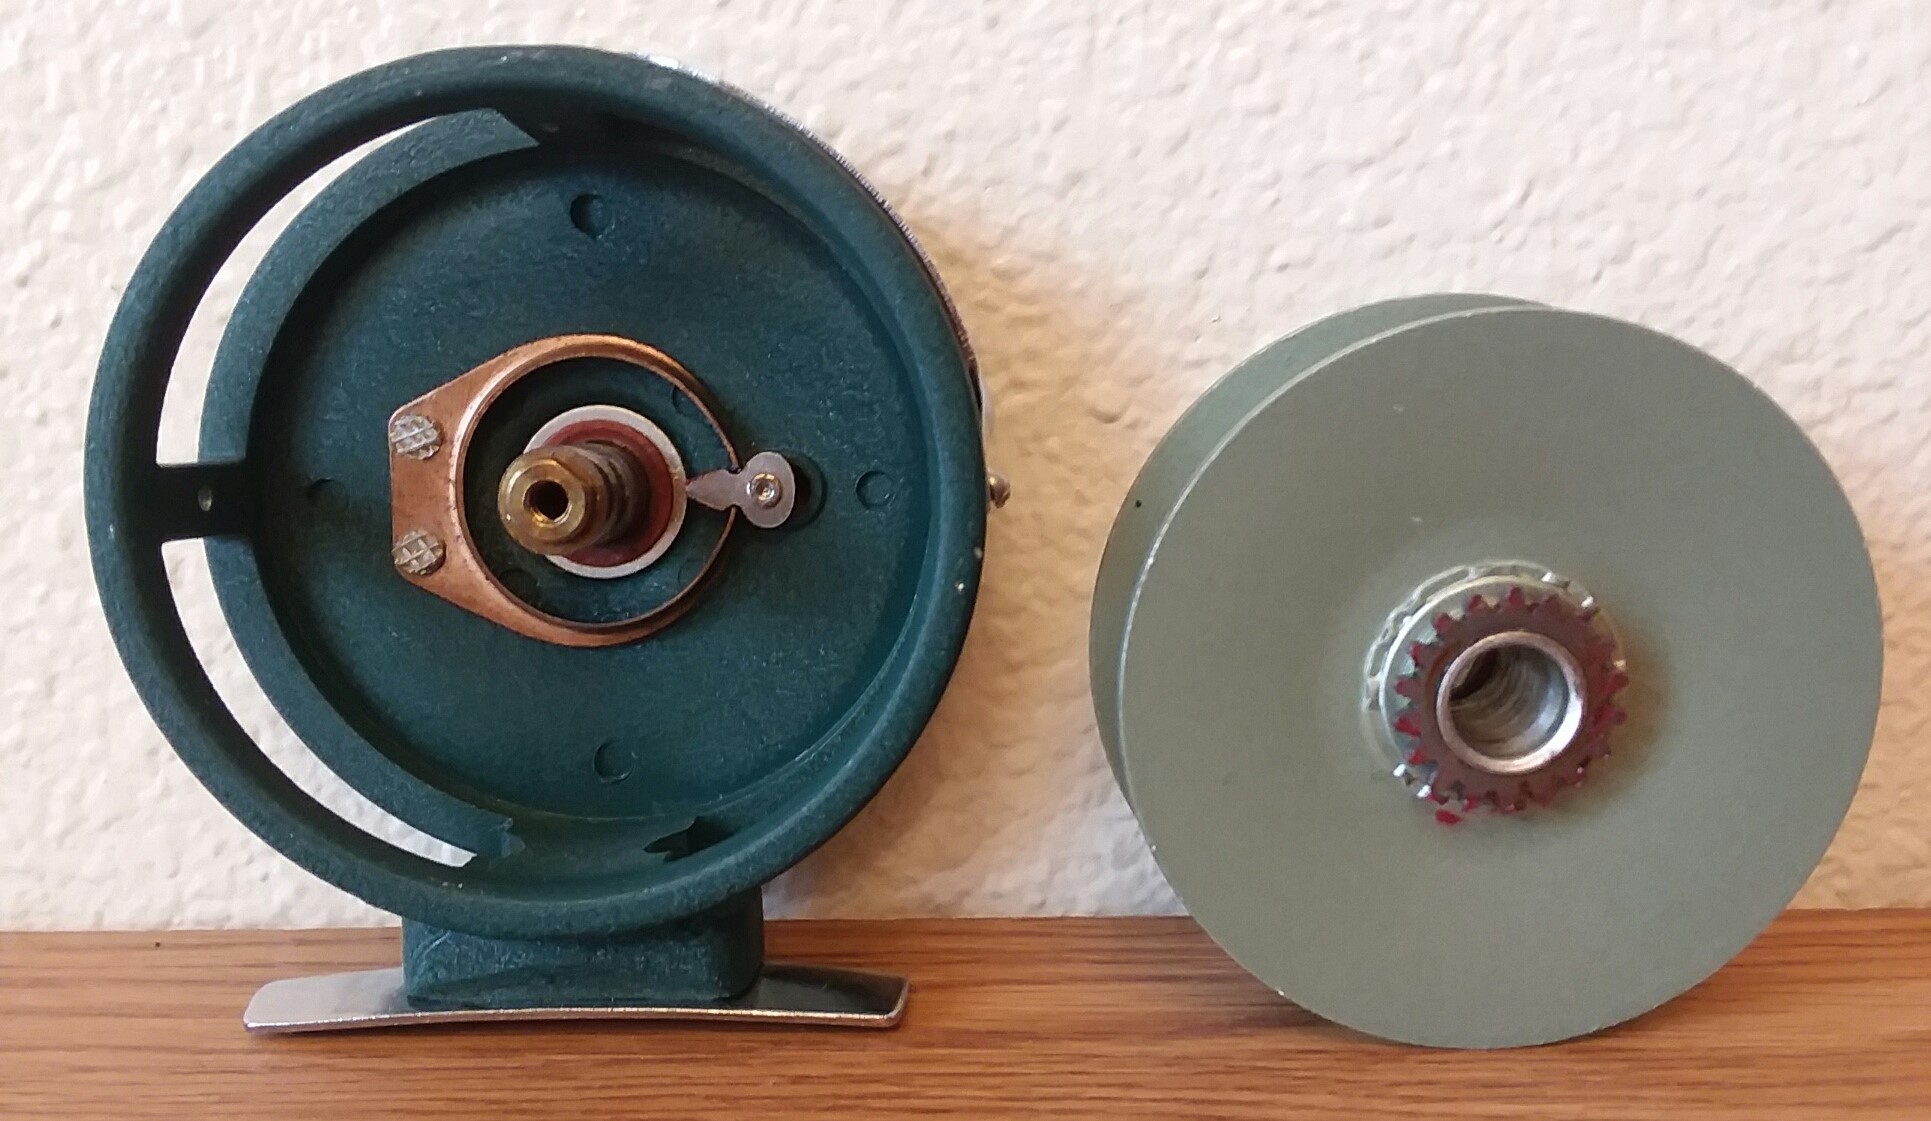 Taico Automatic Fly Fishing Reel Vintage Made in Japan , EC